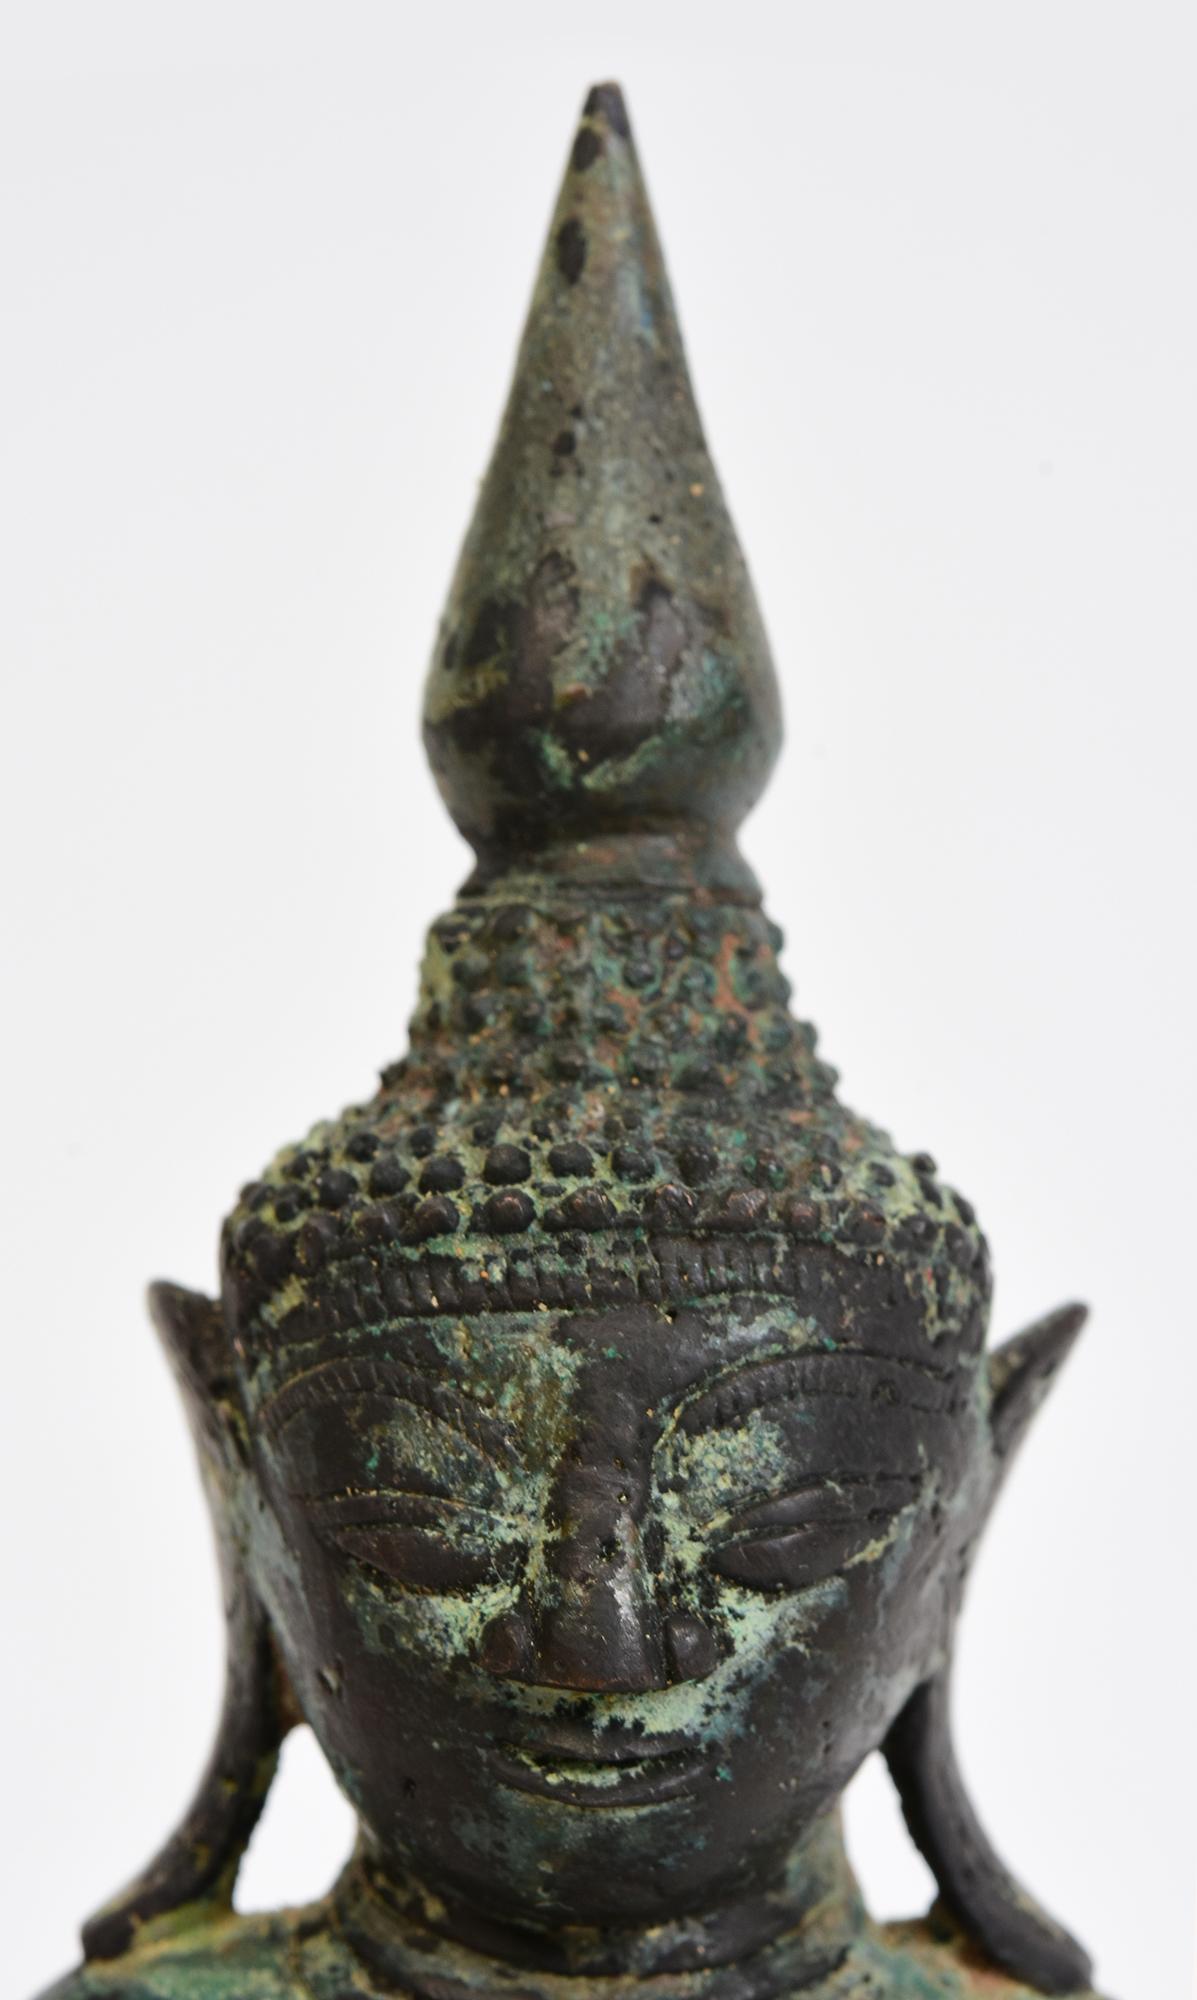 Antique Burmese bronze Buddha sitting in Mara Vijaya (calling the earth to witness) posture on a base.

Age: Burma, Shan Period, 17th Century
Size: Height 20.3 C.M. / Width 9.2 C.M. / Depth 5.5 C.M.
Condition: Nice condition overall (some expected